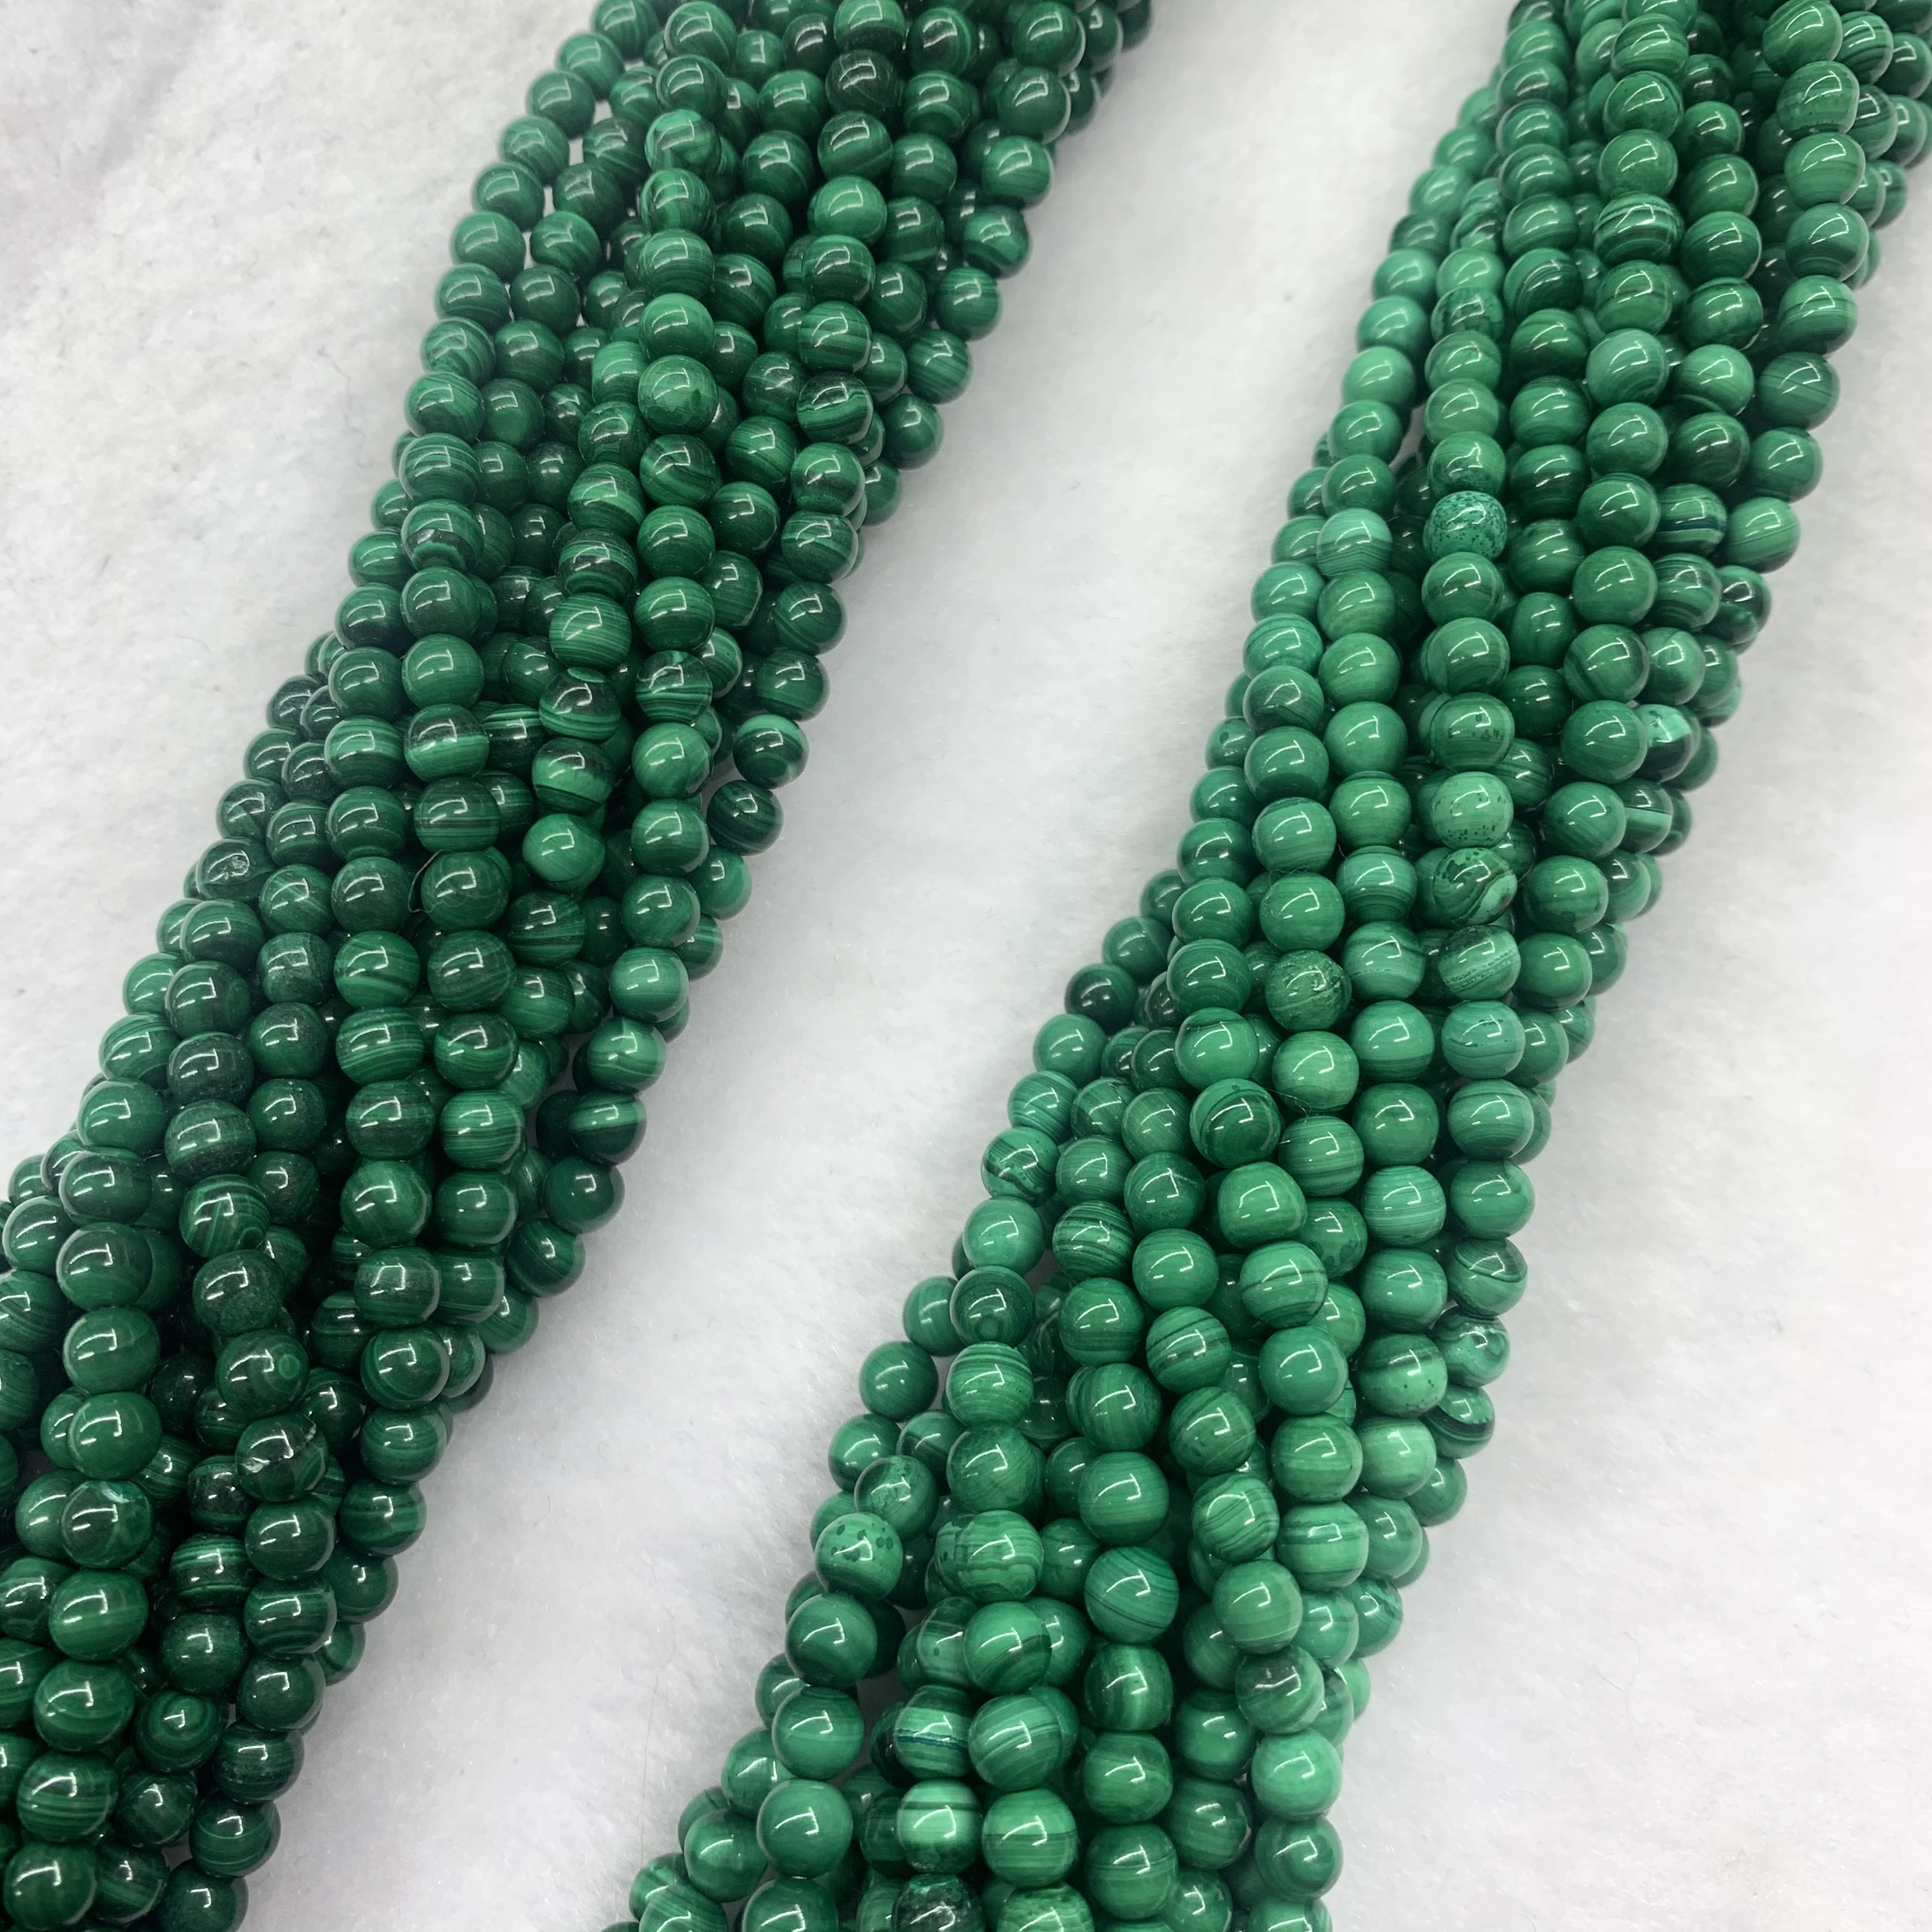 Malachite Natural Stone Beads for Jewelry Making AAAAA Green Gemstones DIY Bracelets Malachites Peacock Stones 4mm for wholesale